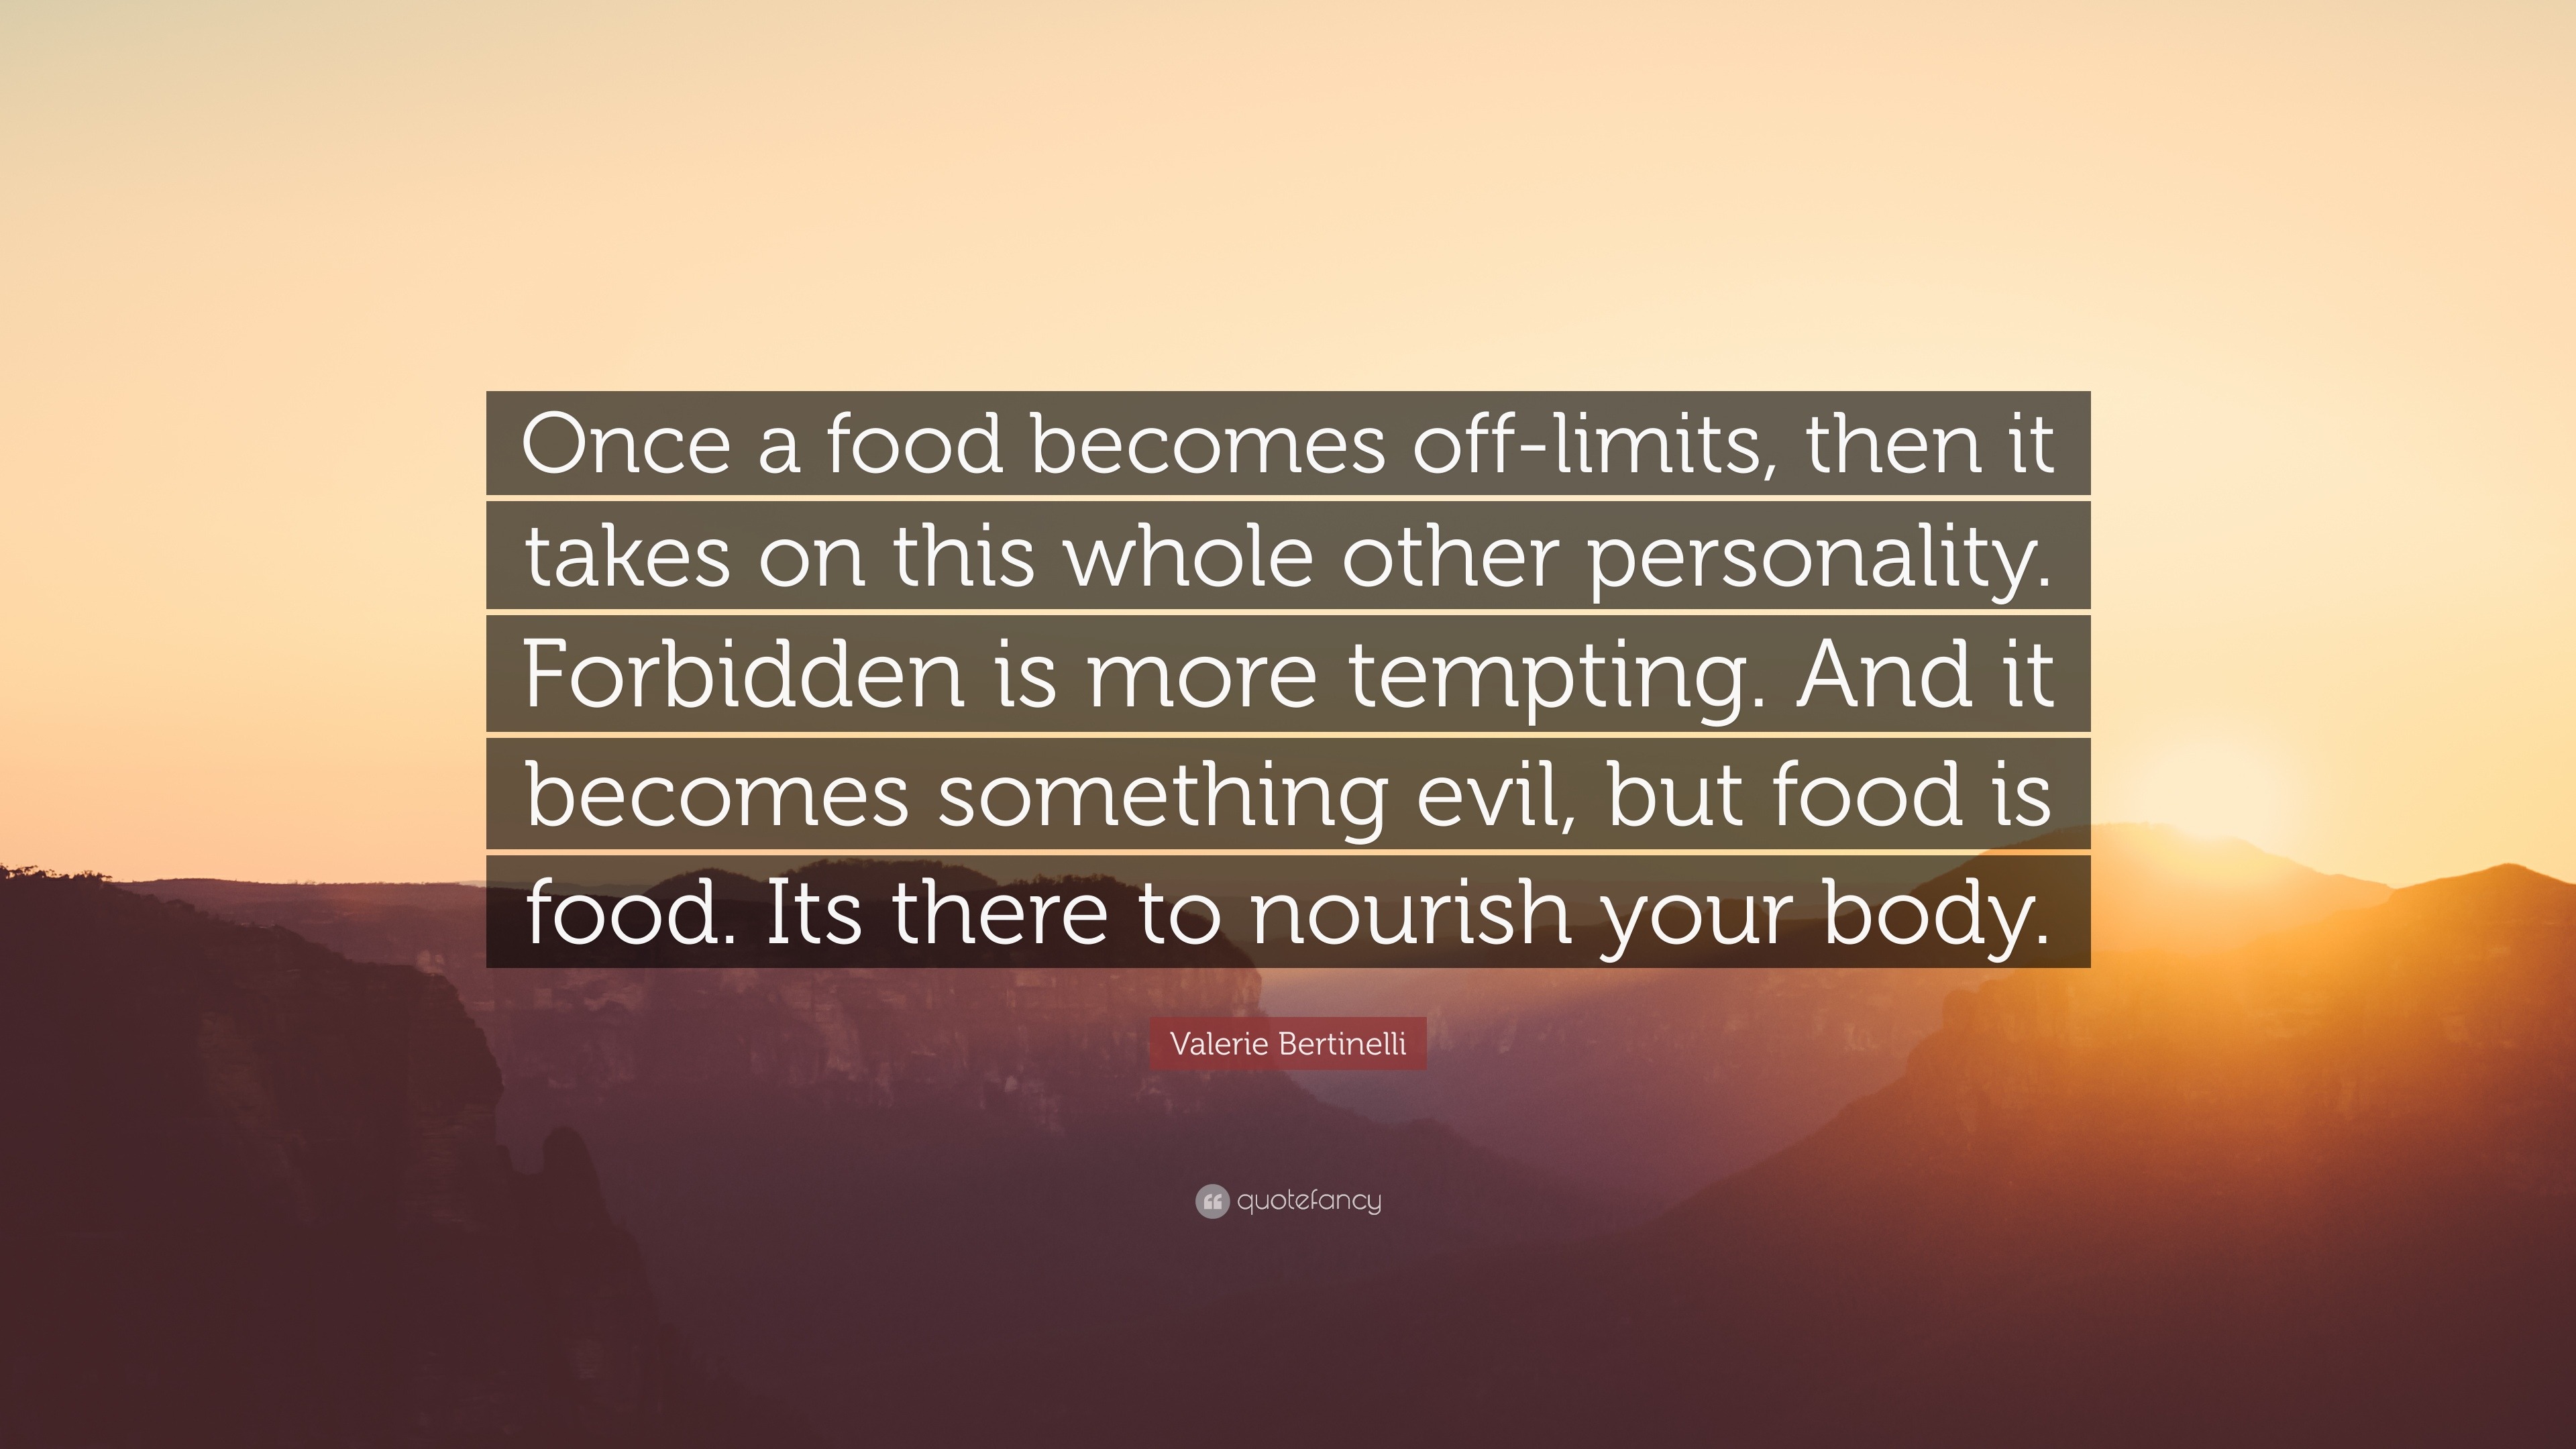 Nourishing the body for success with dietary boundaries